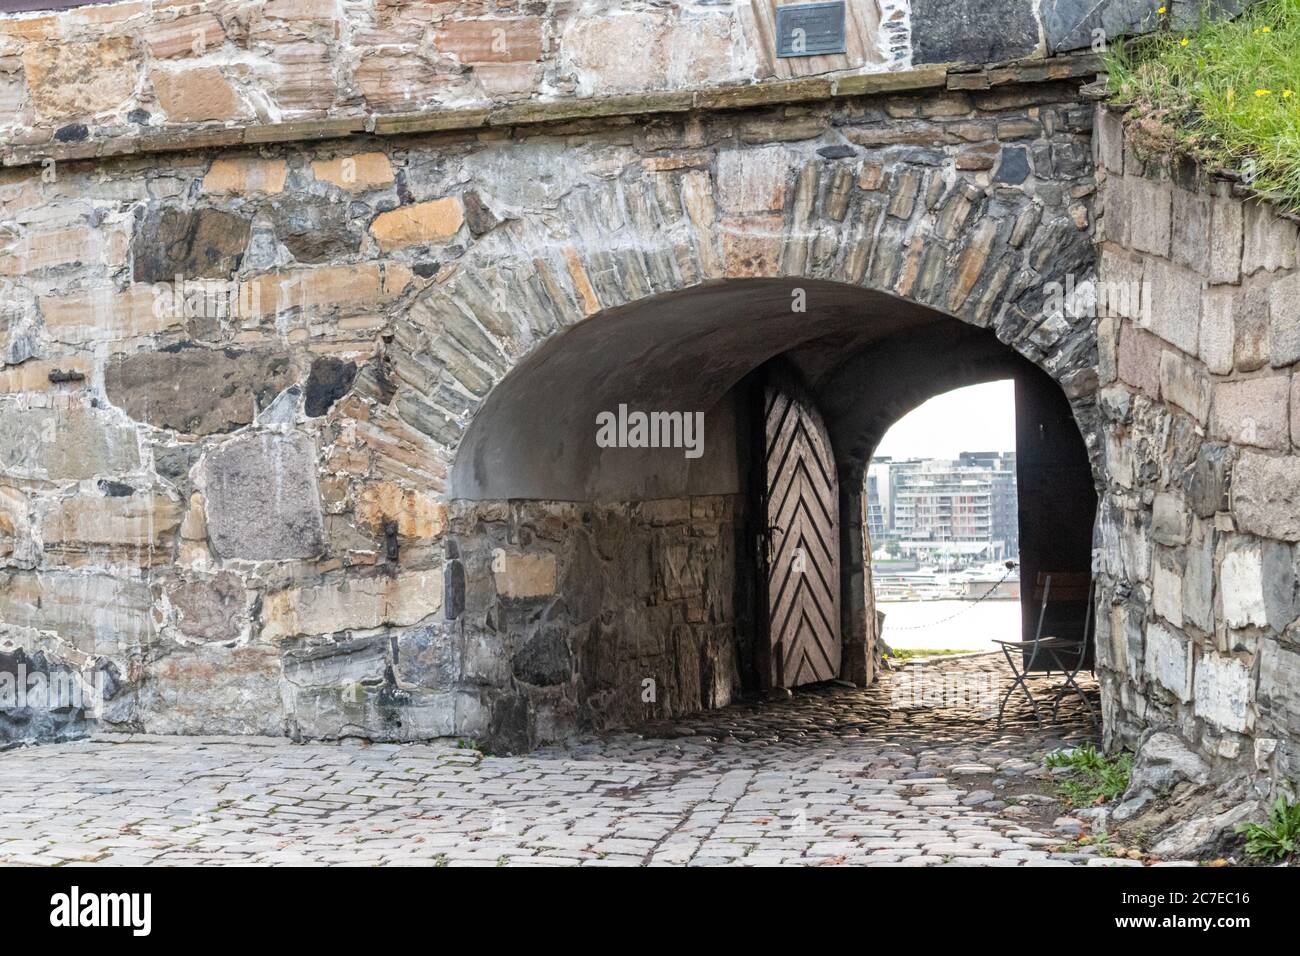 View on Oslo city through old gates of Akershus Fortress in Oslo, Norway. European fort structure landmark Stock Photo